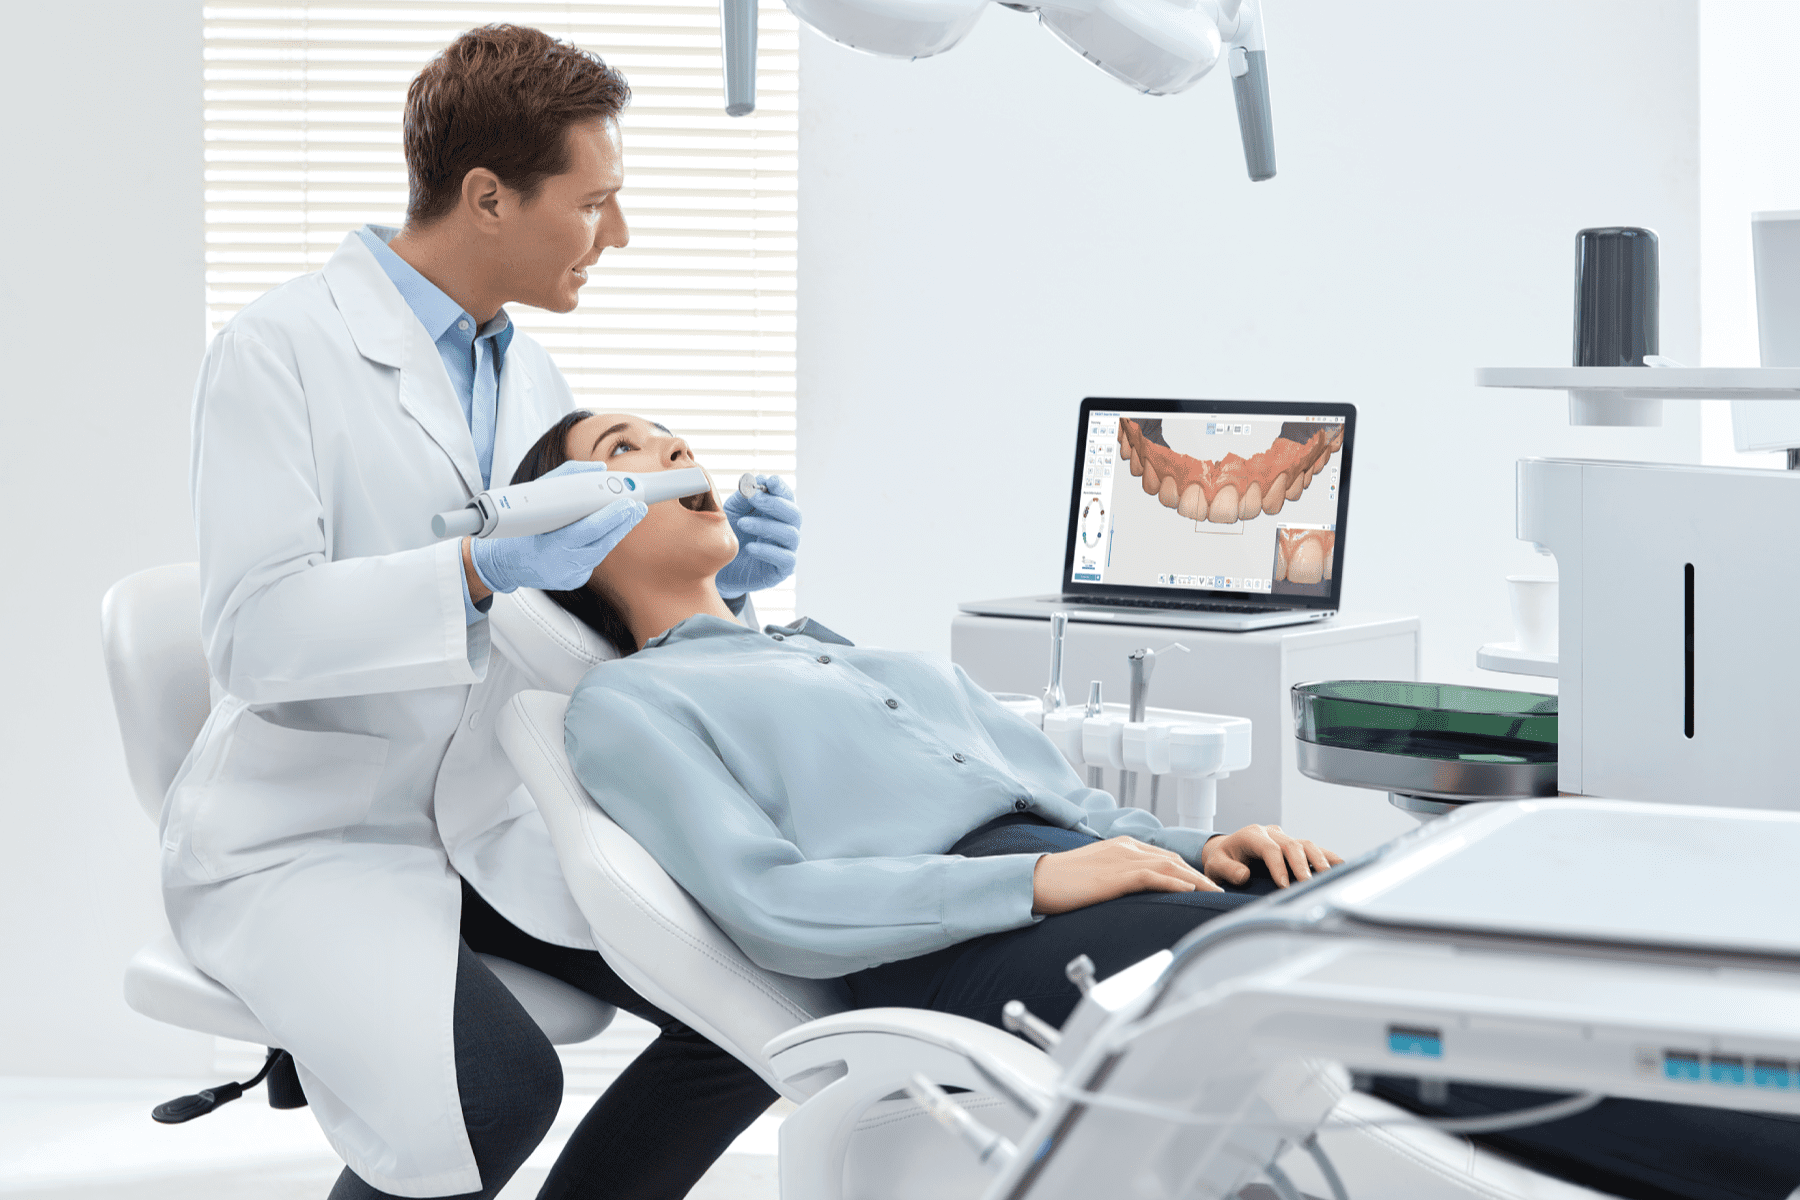 i700 wireless_intraoral scanner_clinical setting